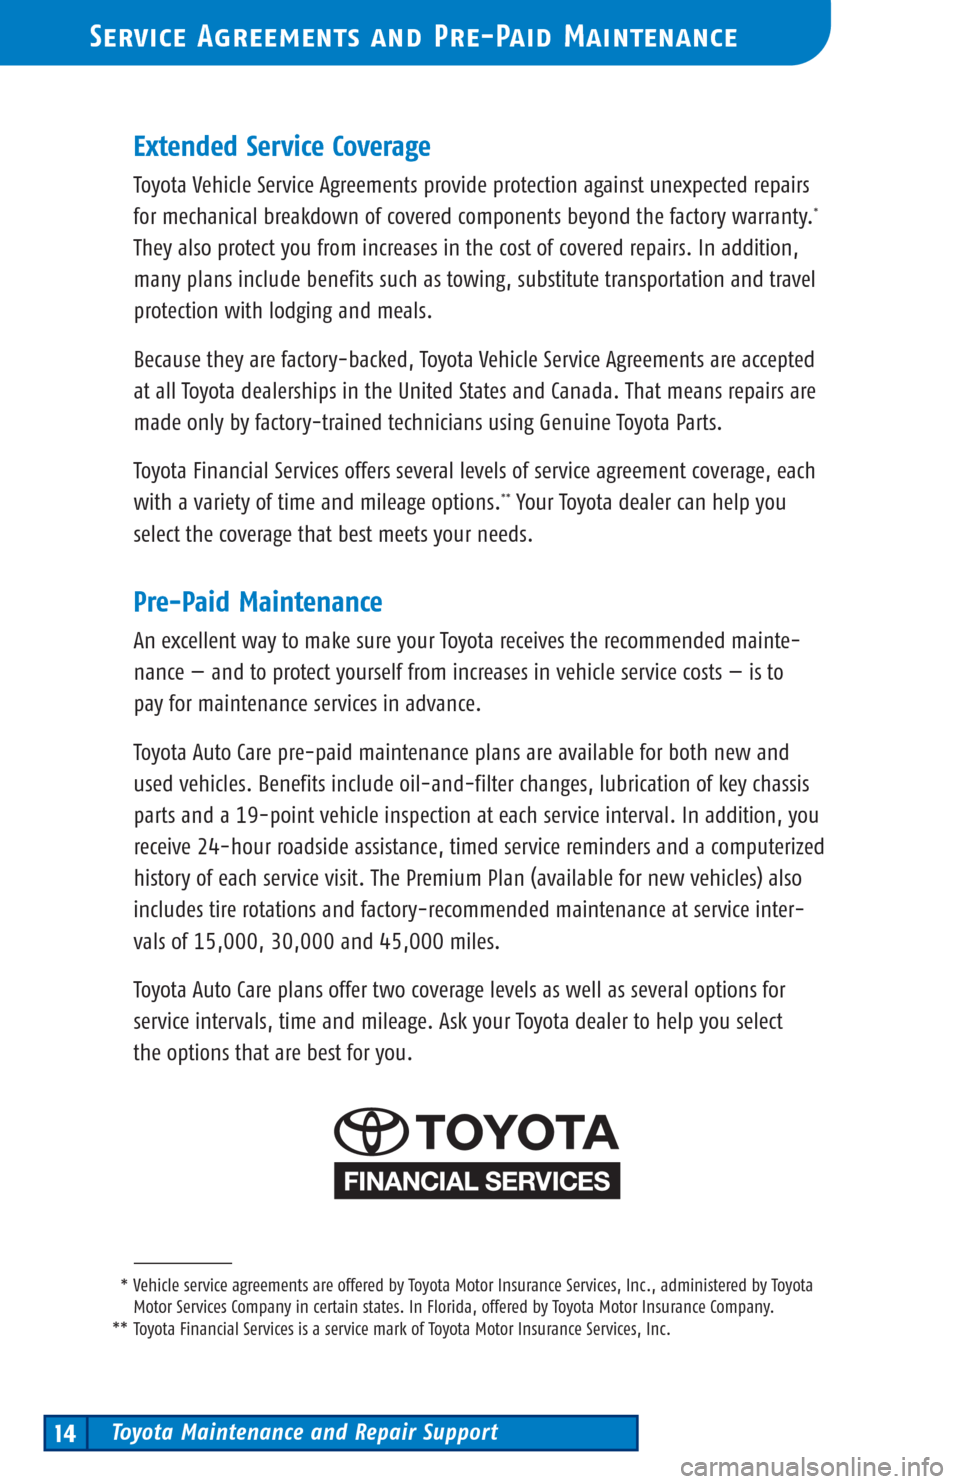 TOYOTA 4RUNNER 2003 N210 / 4.G Scheduled Maintenance Guide Toyota Maintenance and Repair Support14
Service Agreements and Pre-Paid Maintenance
Extended Service Coverage
Toyota Vehicle Service Agreements provide protection against unexpected repairs
formechani